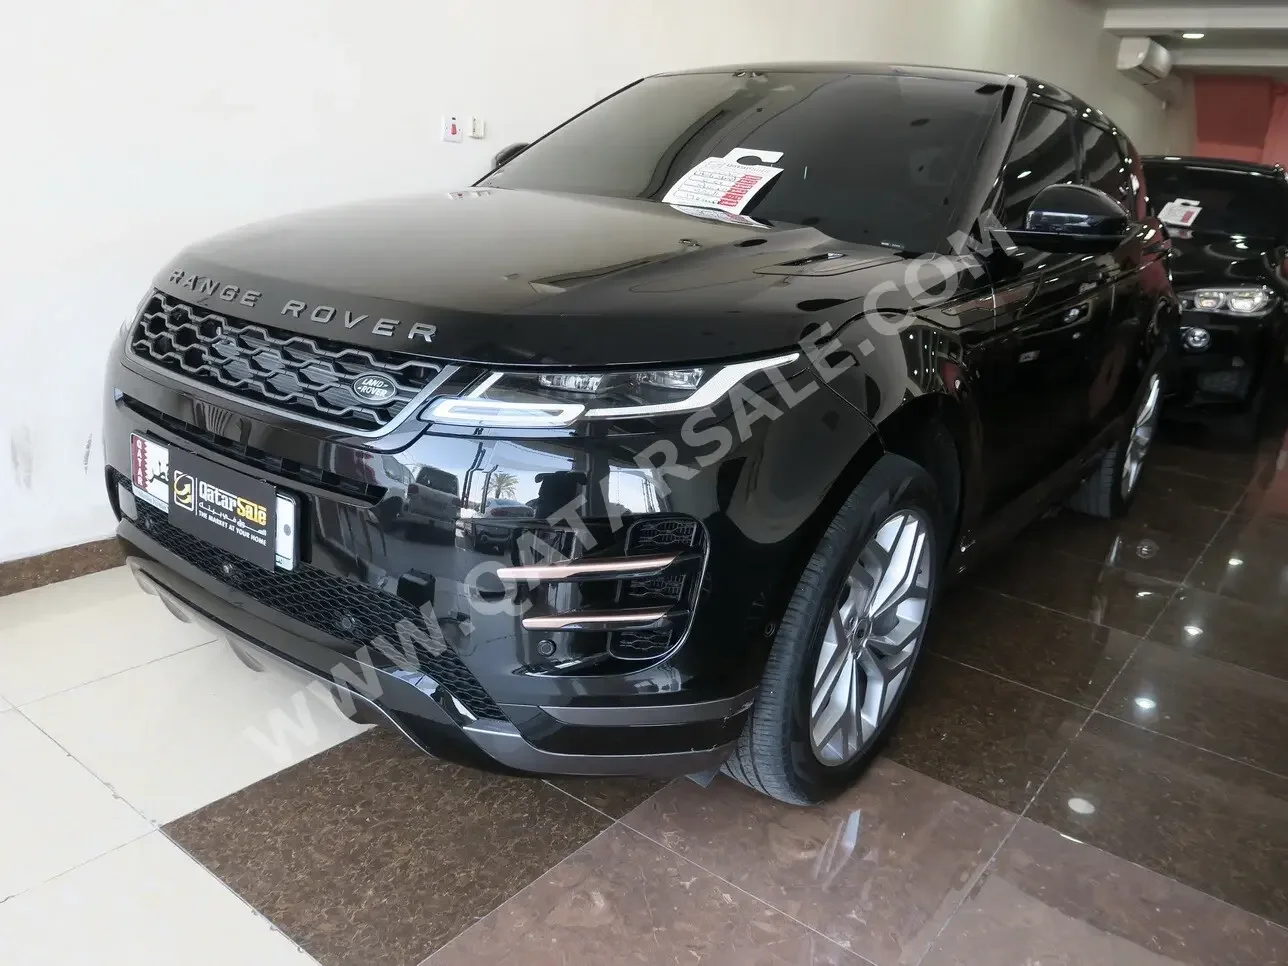 Land Rover  Evoque  R-Dynamic  2021  Automatic  9,000 Km  4 Cylinder  Four Wheel Drive (4WD)  SUV  Black